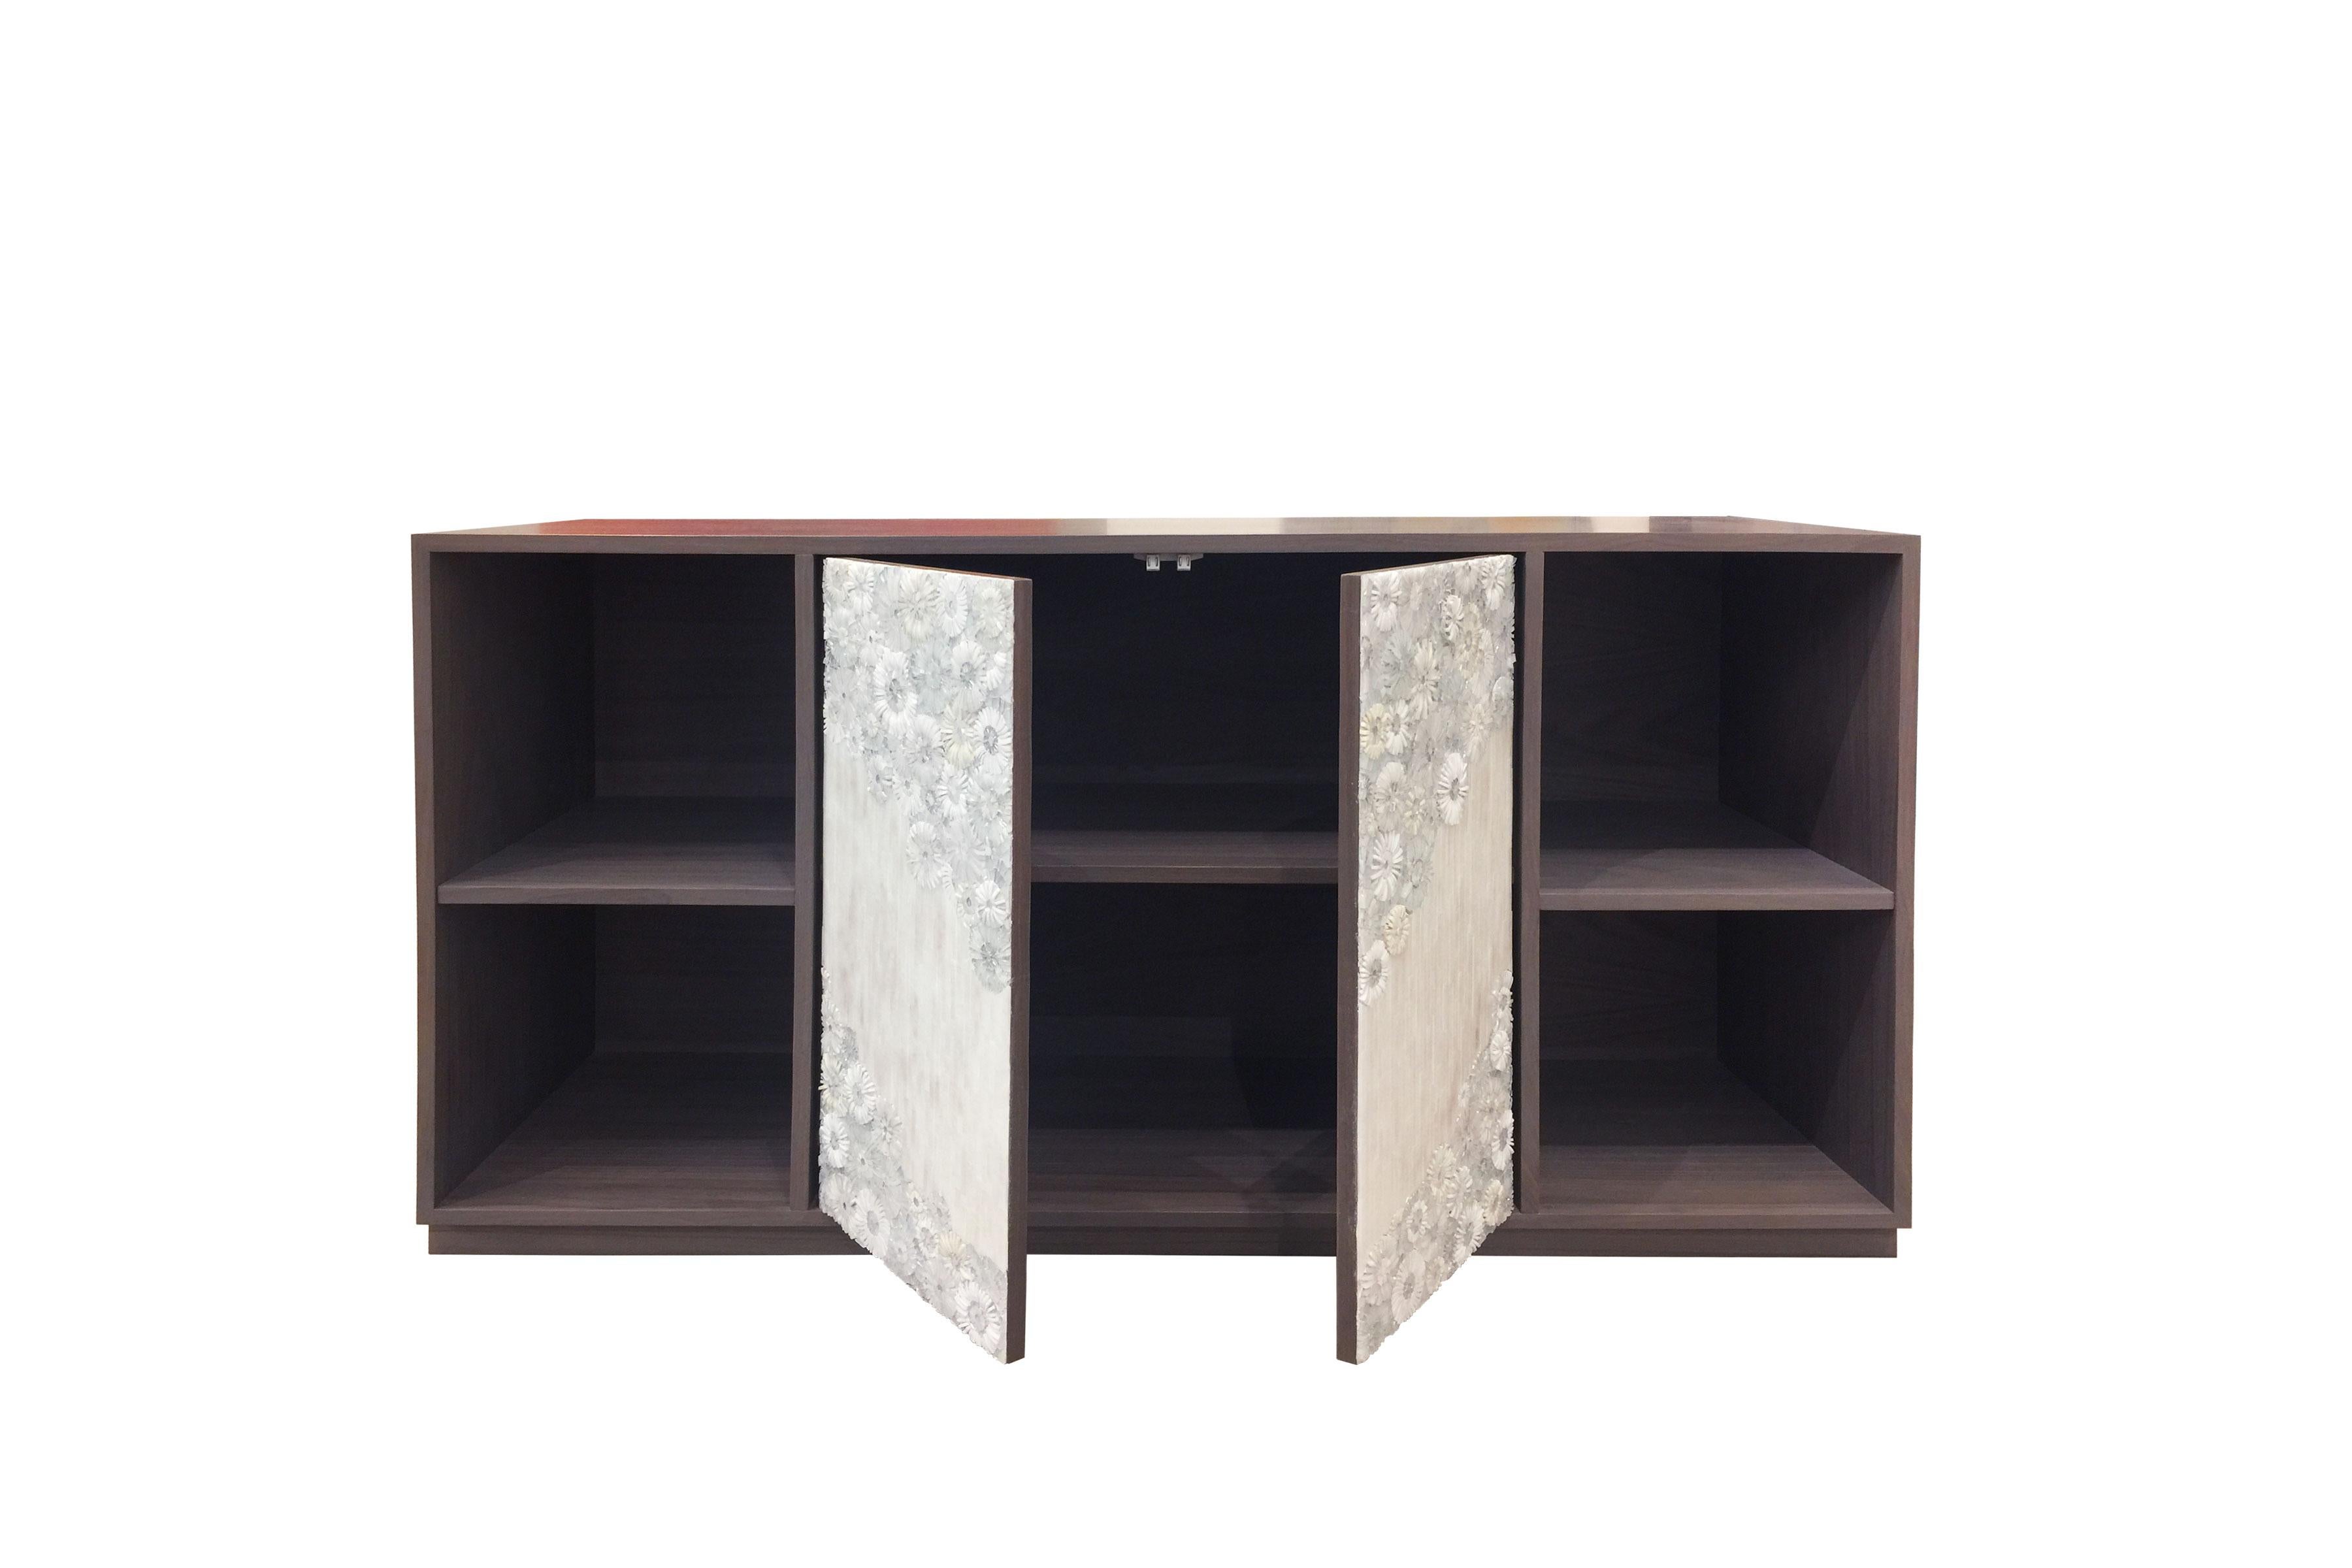 The Blossom buffet by Ercole Home has 2-door front and 2-open shelves, with gray stain wood finish on American black walnut.
Handcut glass mosaic in variety shades of white and ivory decorate the surface in Blossom and stipe mosaic pattern.
2'' h